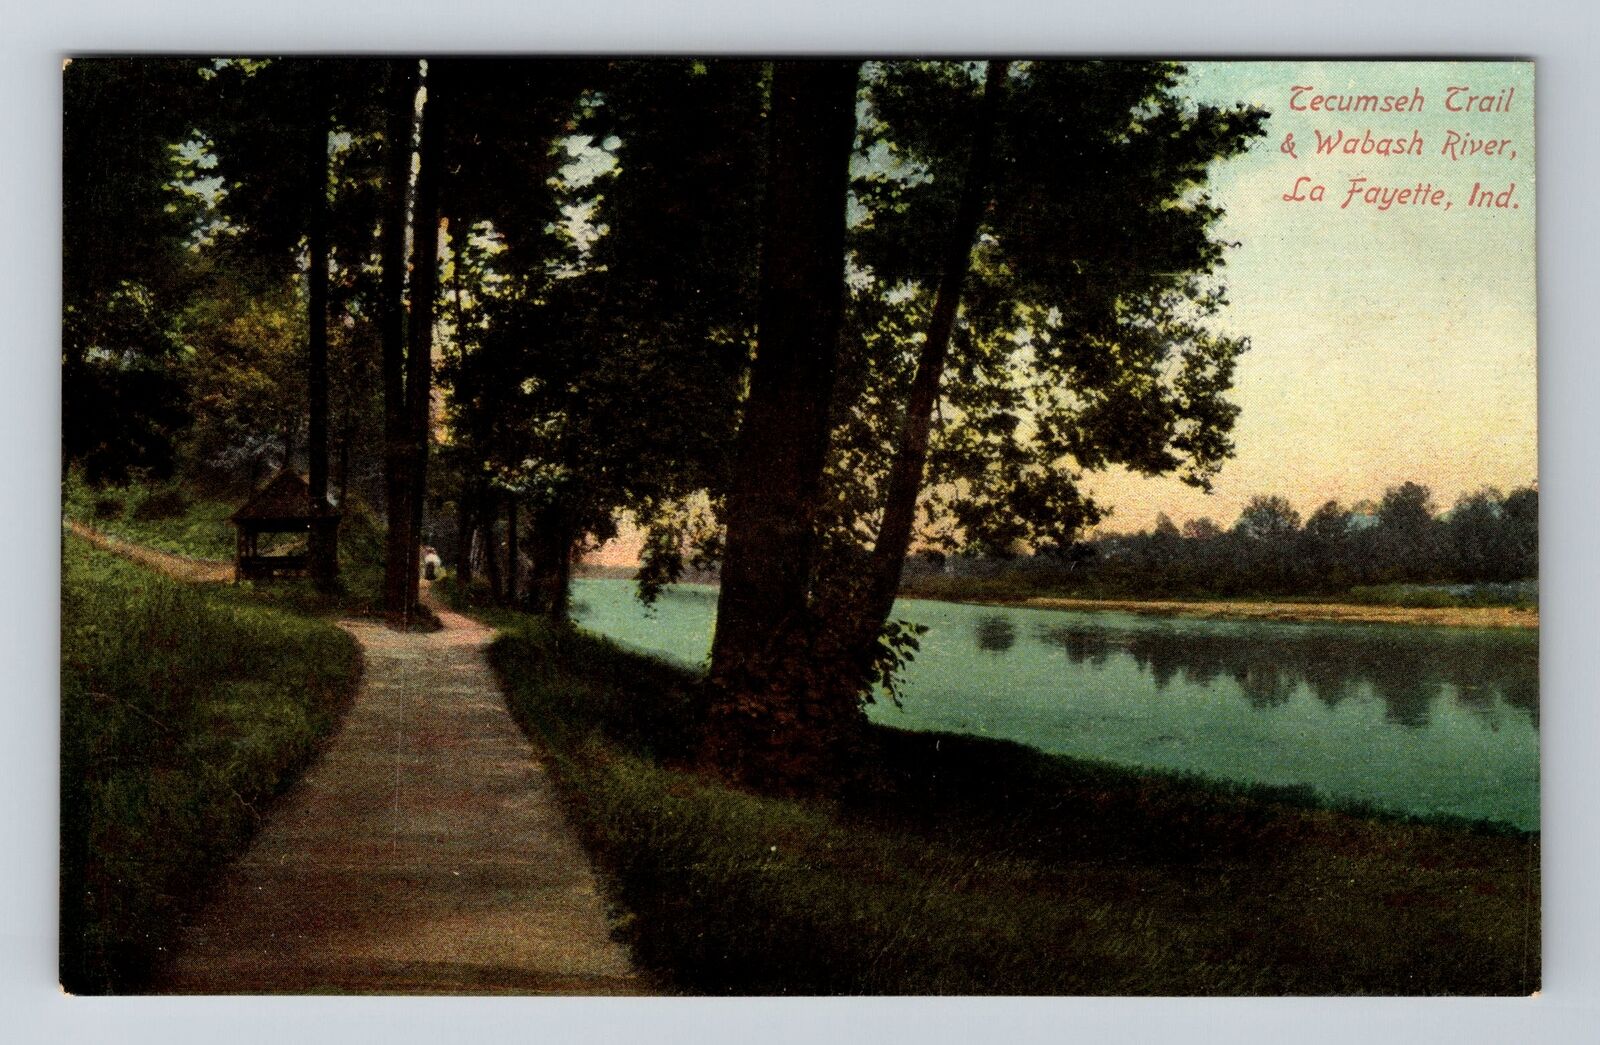 La Fayette IN-Indiana, Tecumseh Trail and Wabash River, Vintage Postcard